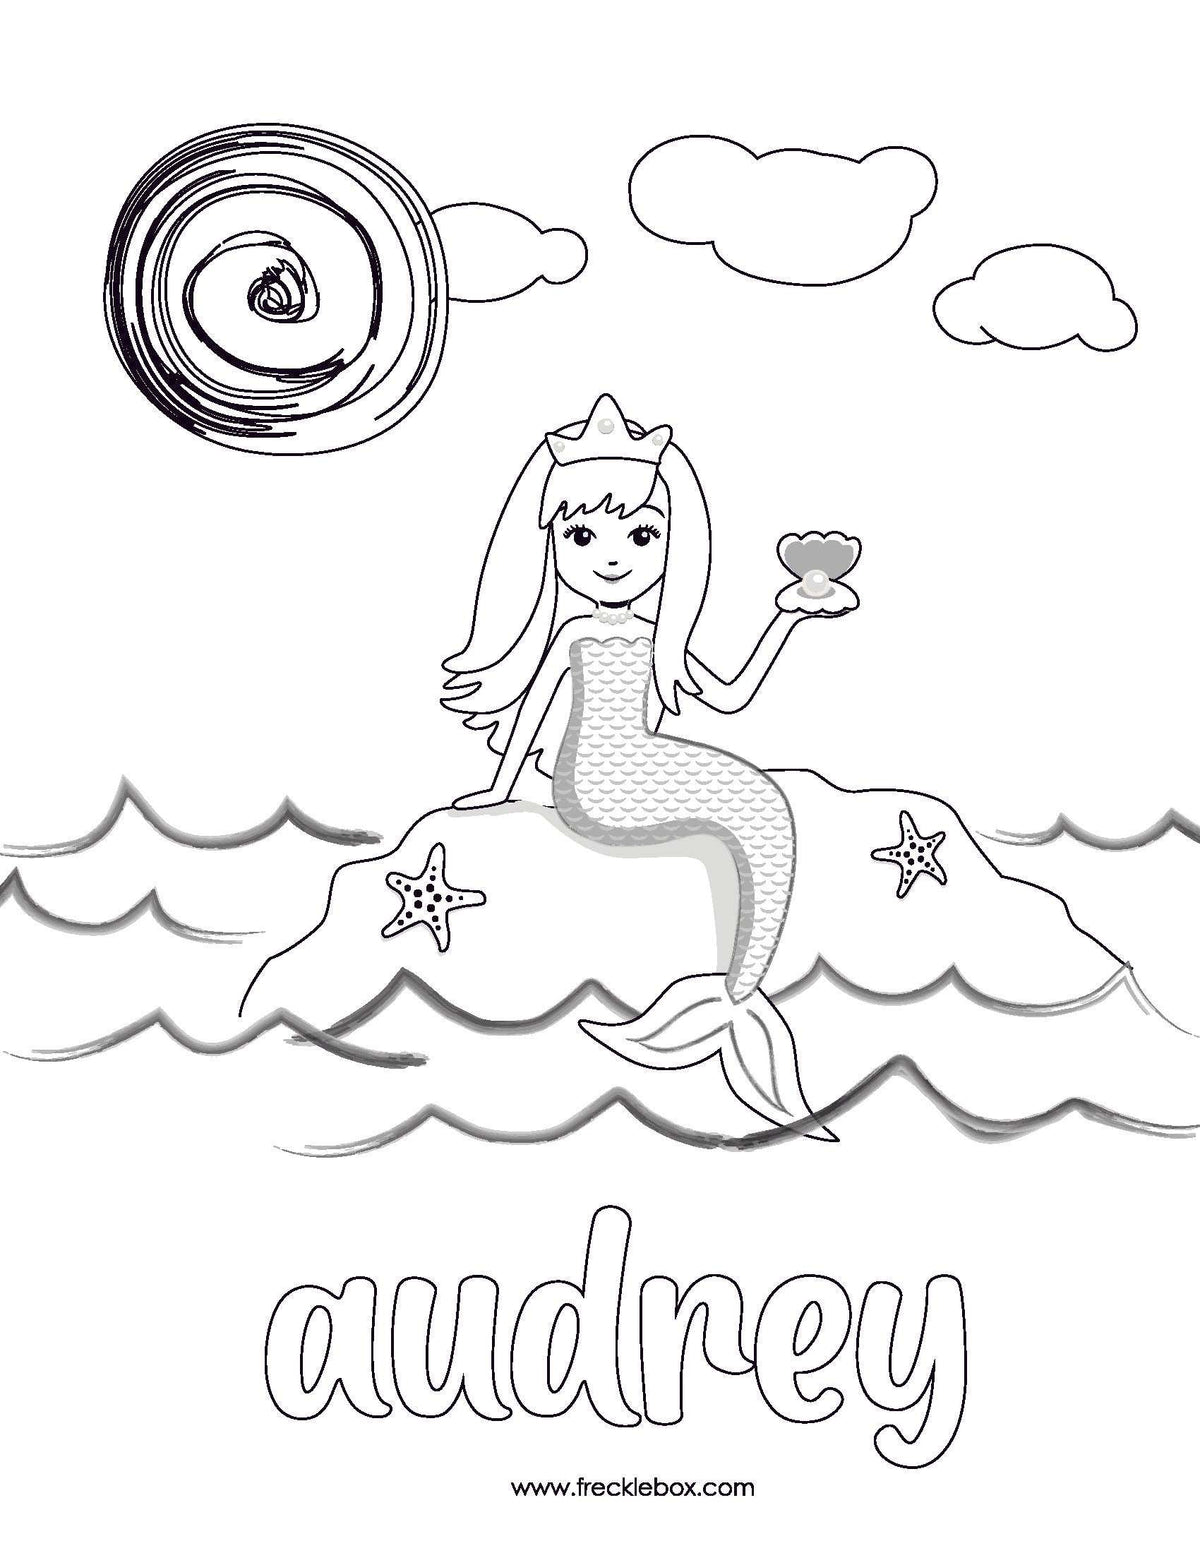 Free downloadable coloring page with mermaid, personalized with child&#39;s name.